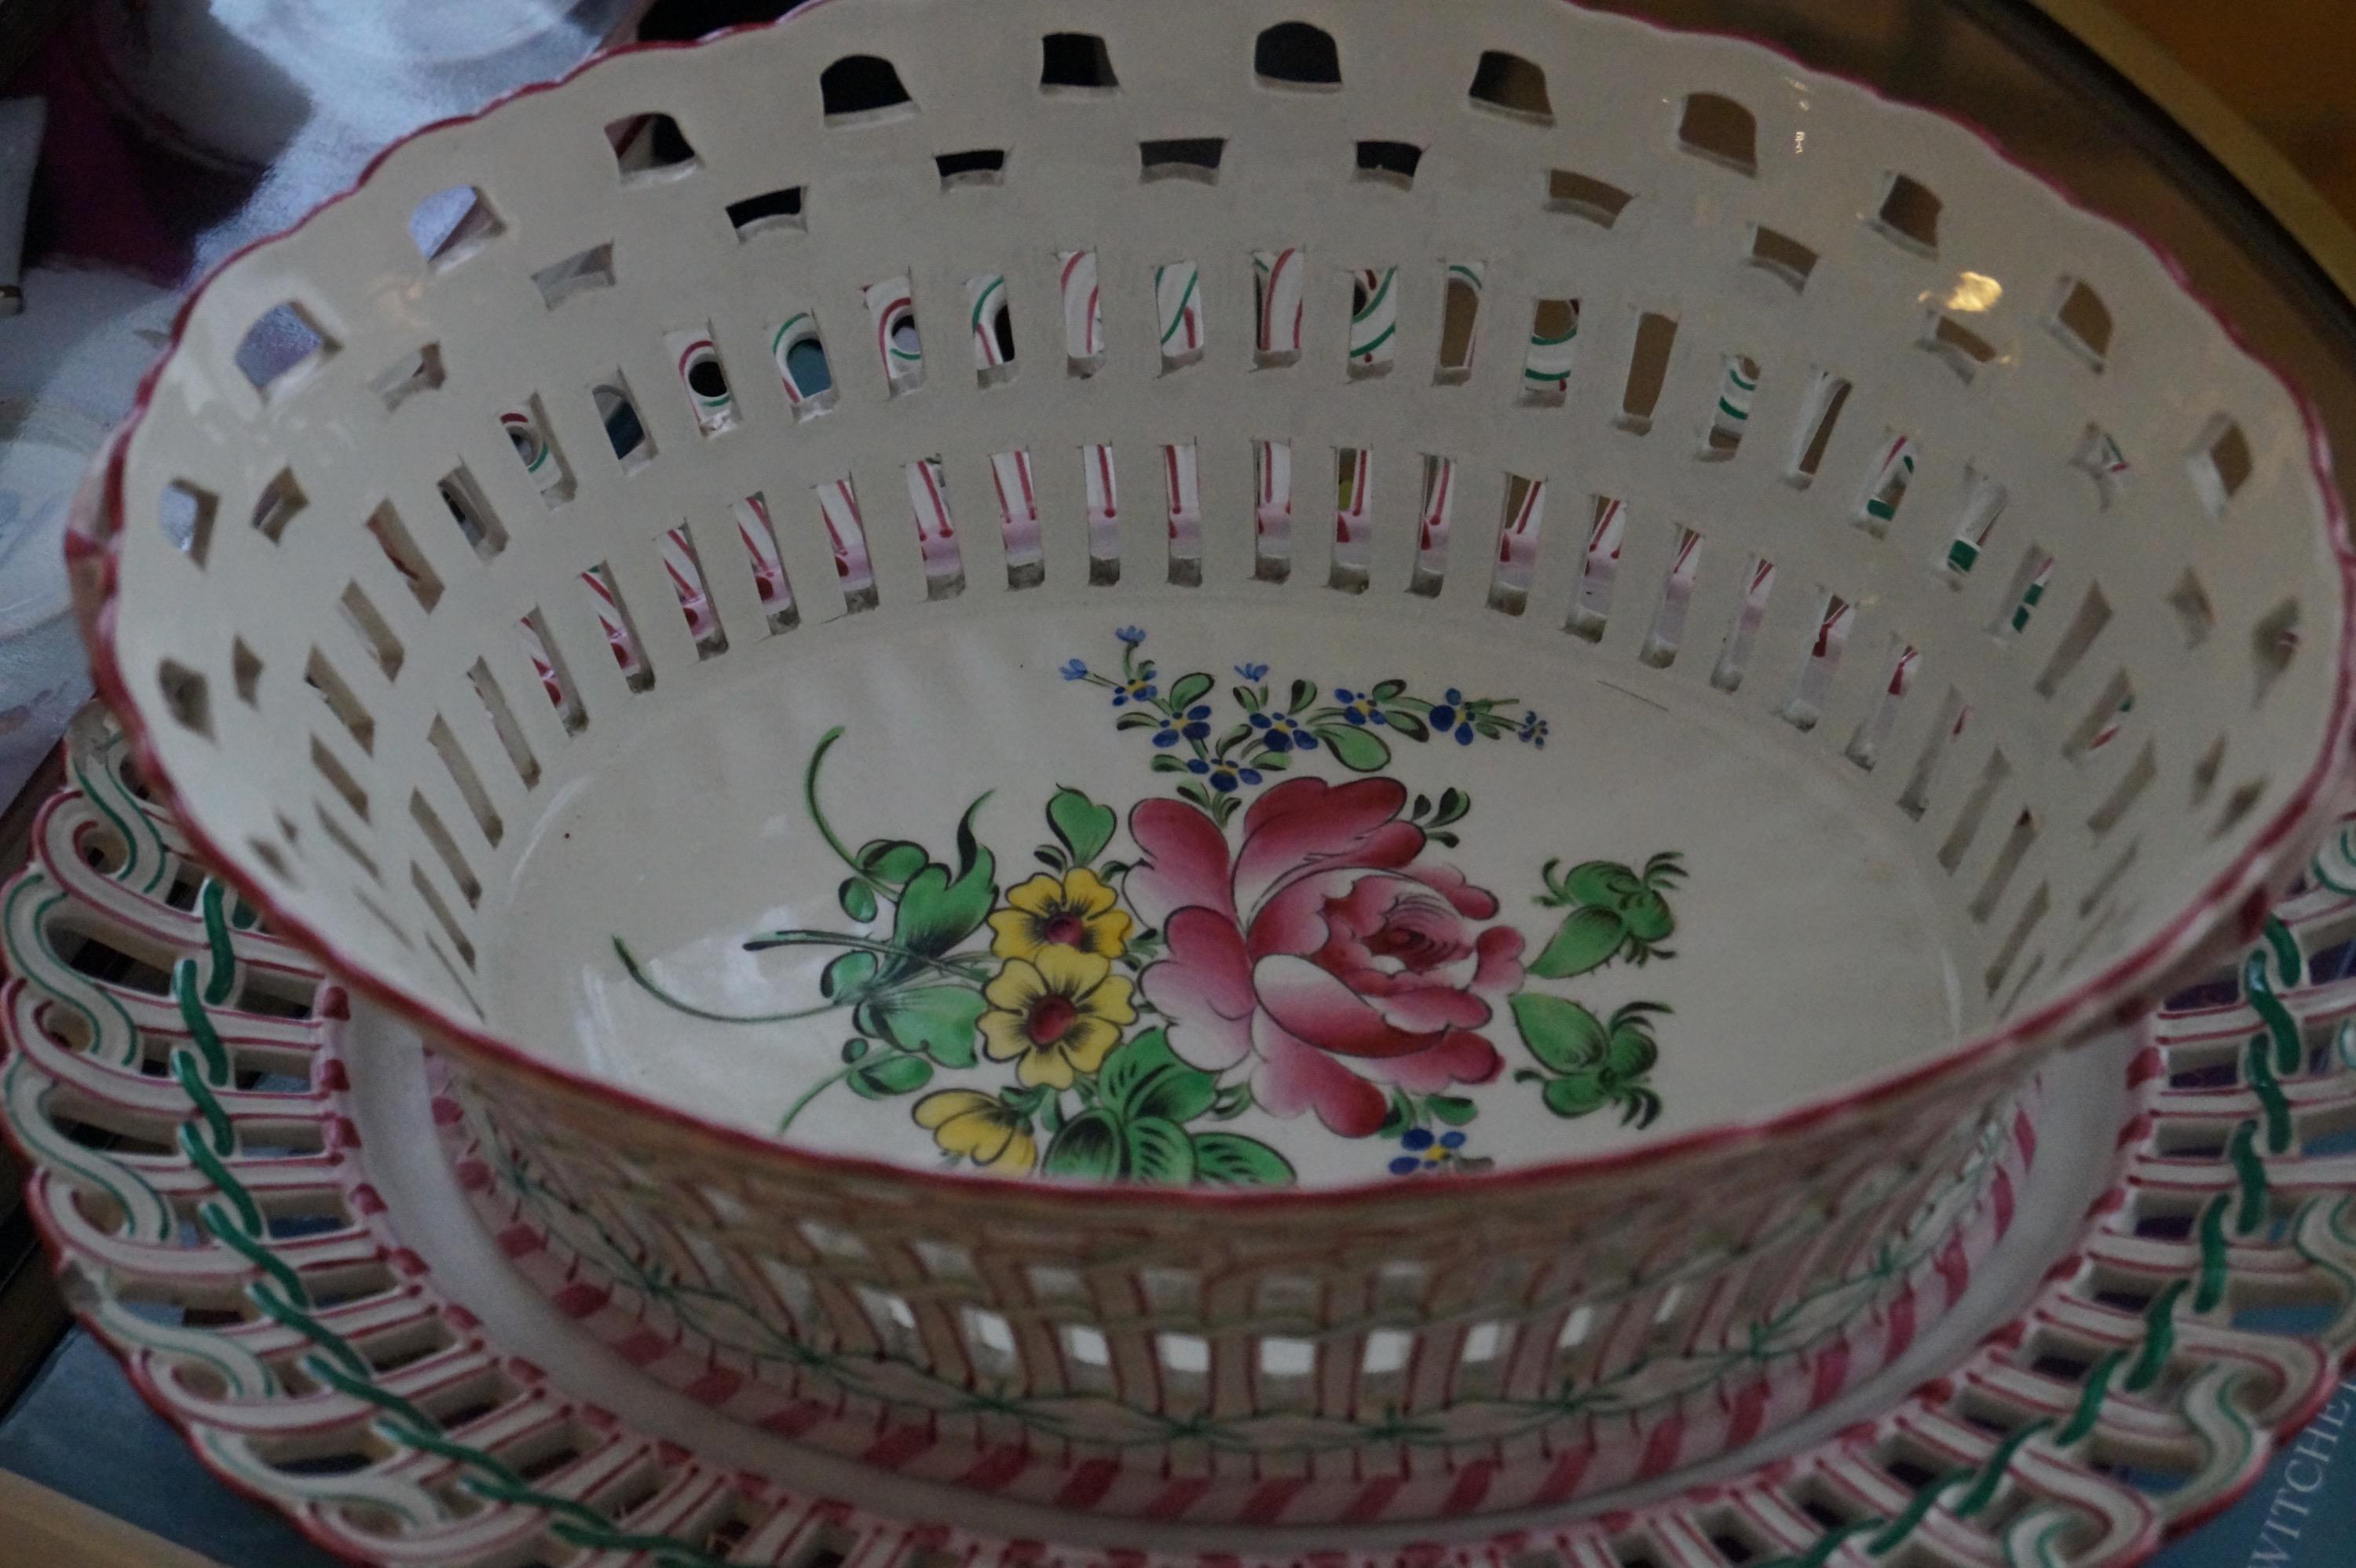 France, circa 1880.

Luneville Keller et Guerin with their famous Strassbourg hand painted decor.

The basket is in very good condition, the under plate has some minor damage.

Measures: Basket 19 cm x 25 cm, 10 cm high
Under plate 24 cm x 30